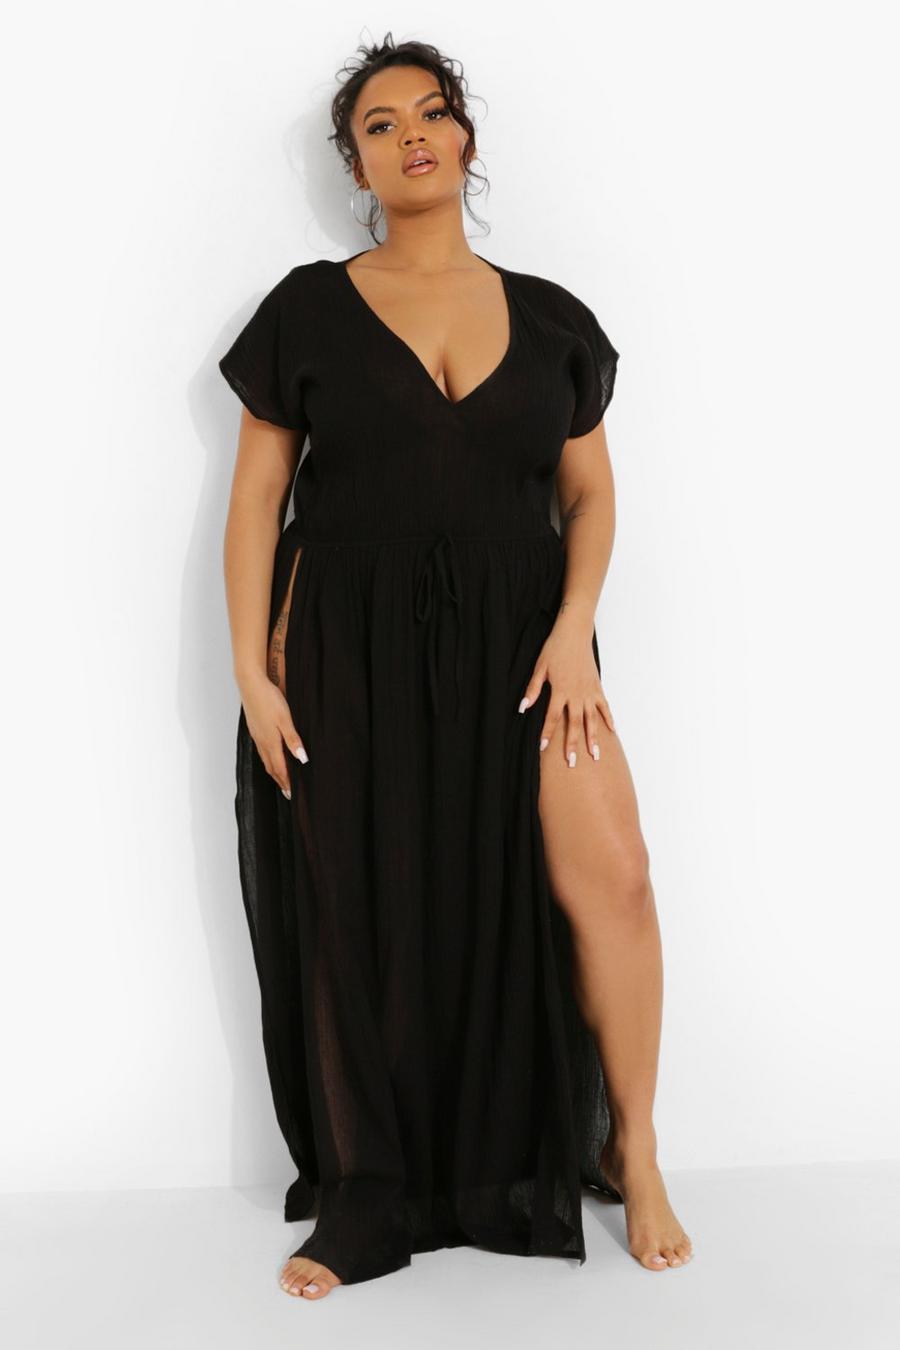 Plus Size Cover Ups, Plus Size Swimsuit Cover Ups